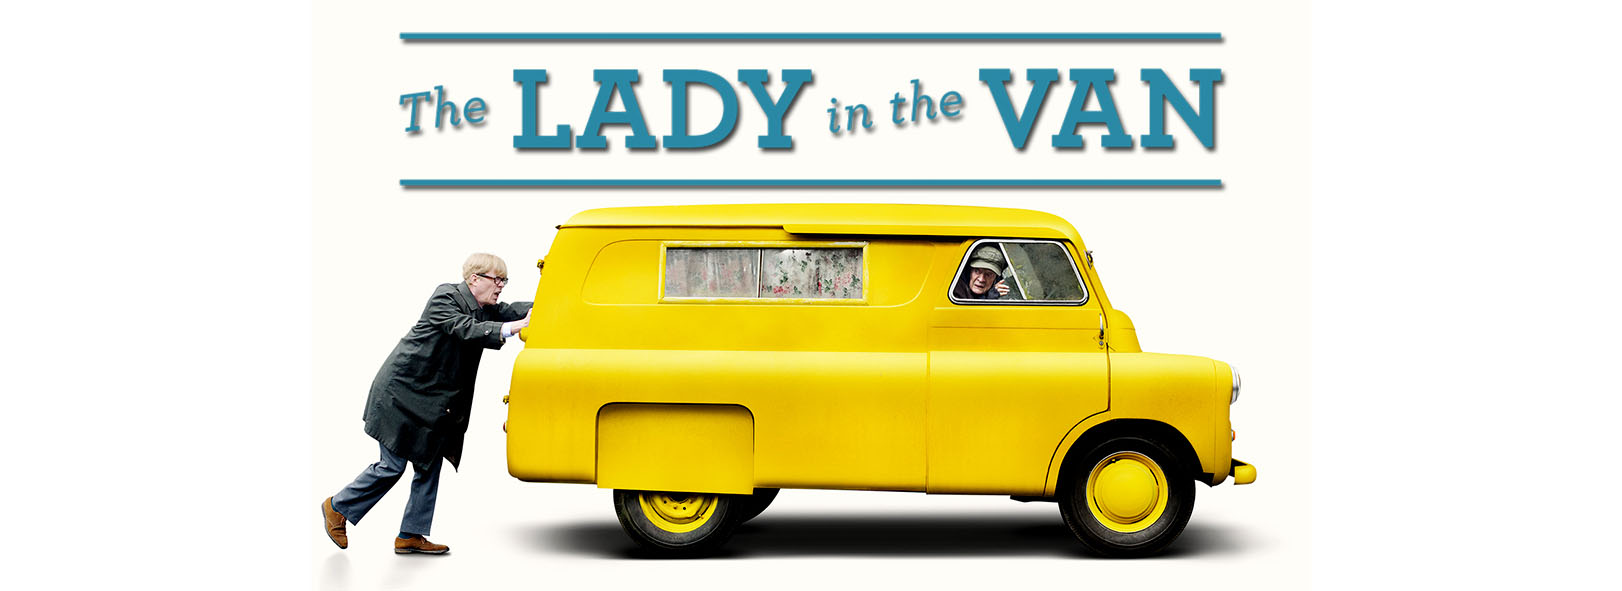 The Lady in the Van: Press Conference Coverage